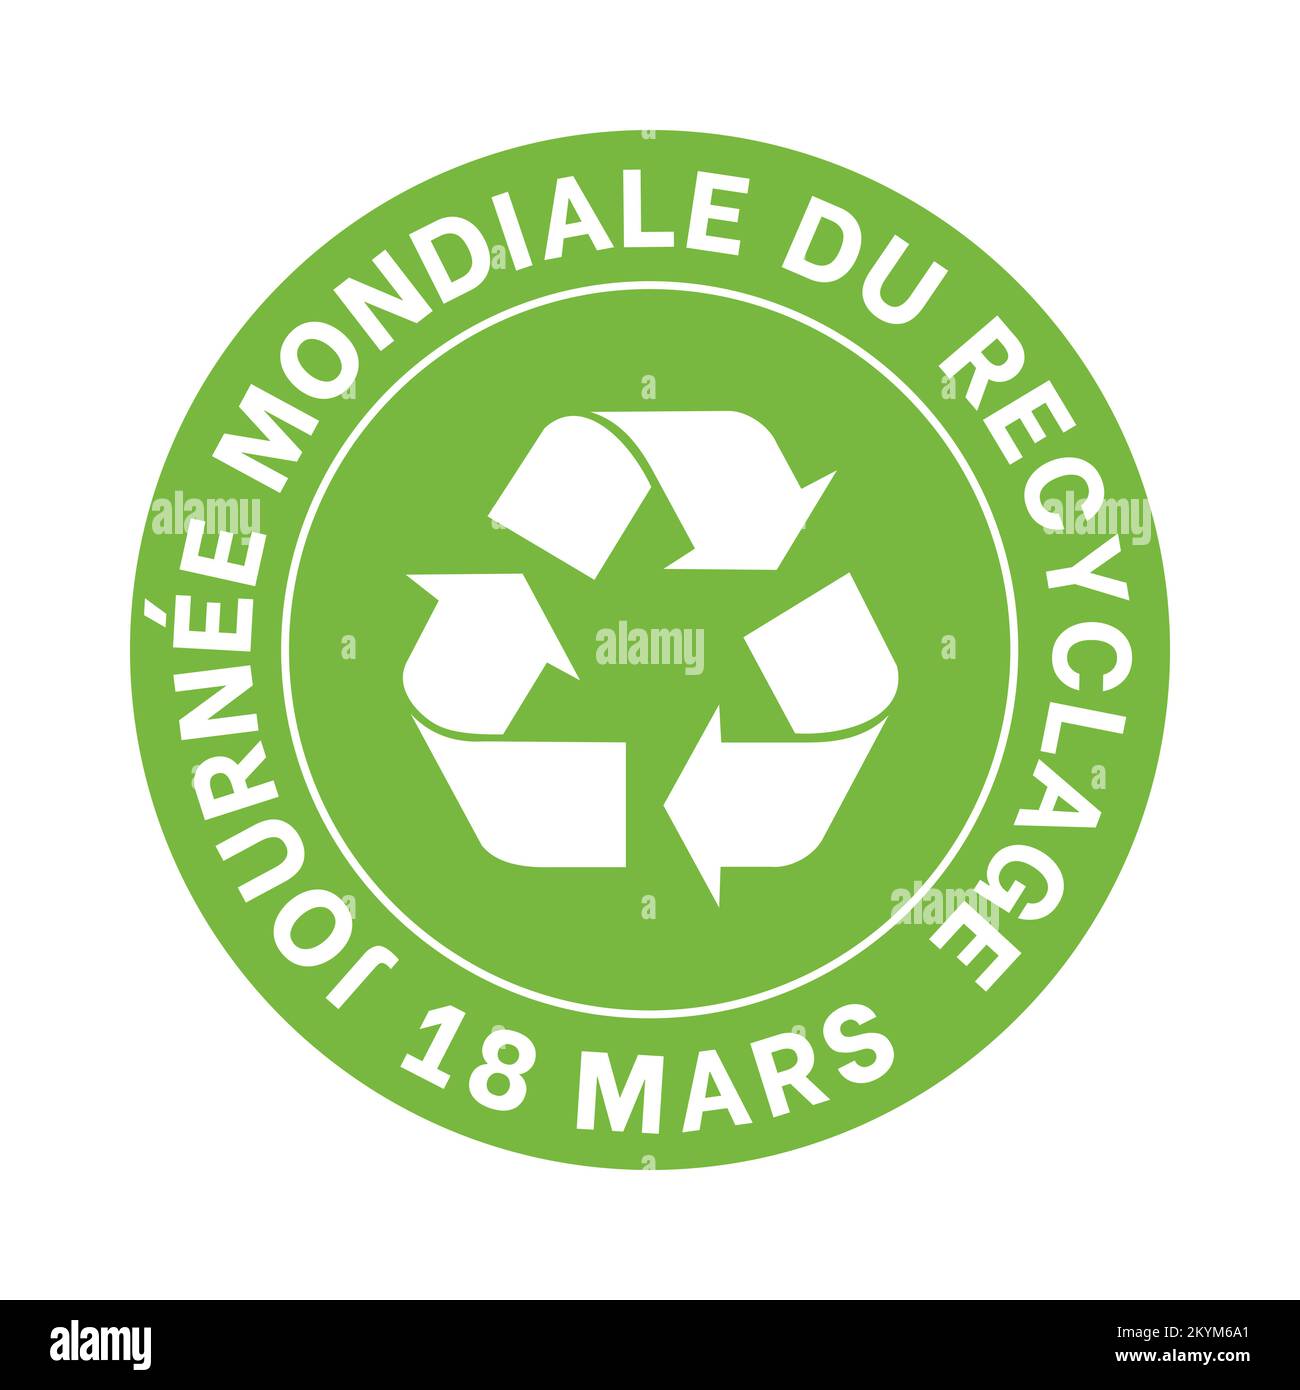 Global recycling day march 18 symbol called journee mondiale du recyclage 18 mars in French language Stock Photo